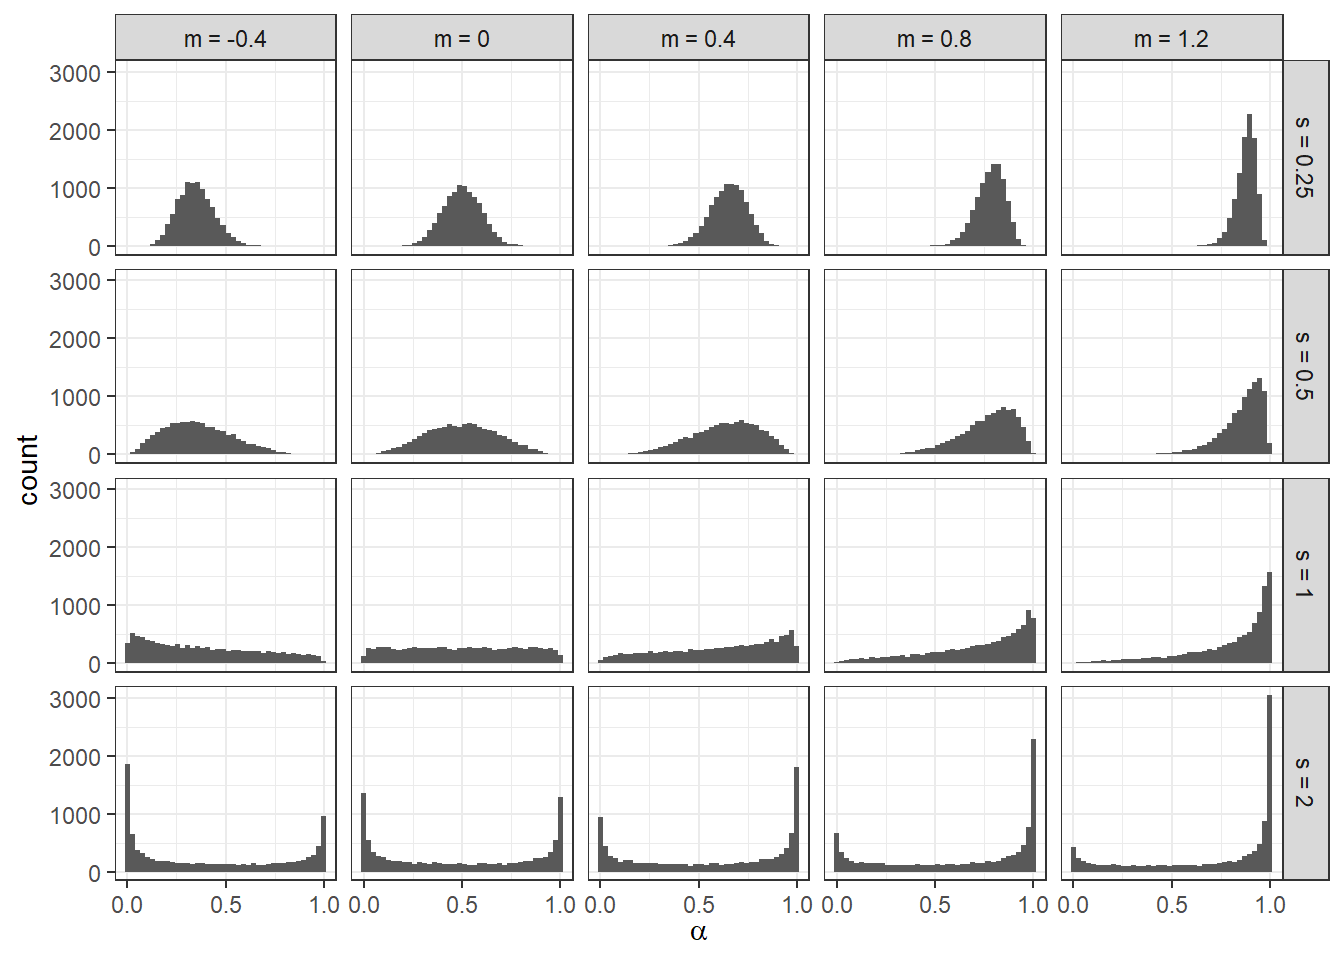 Histograms of 10,000 draws from the probit-normal distribution for various location ($m$) and scale ($s$) parameters. 